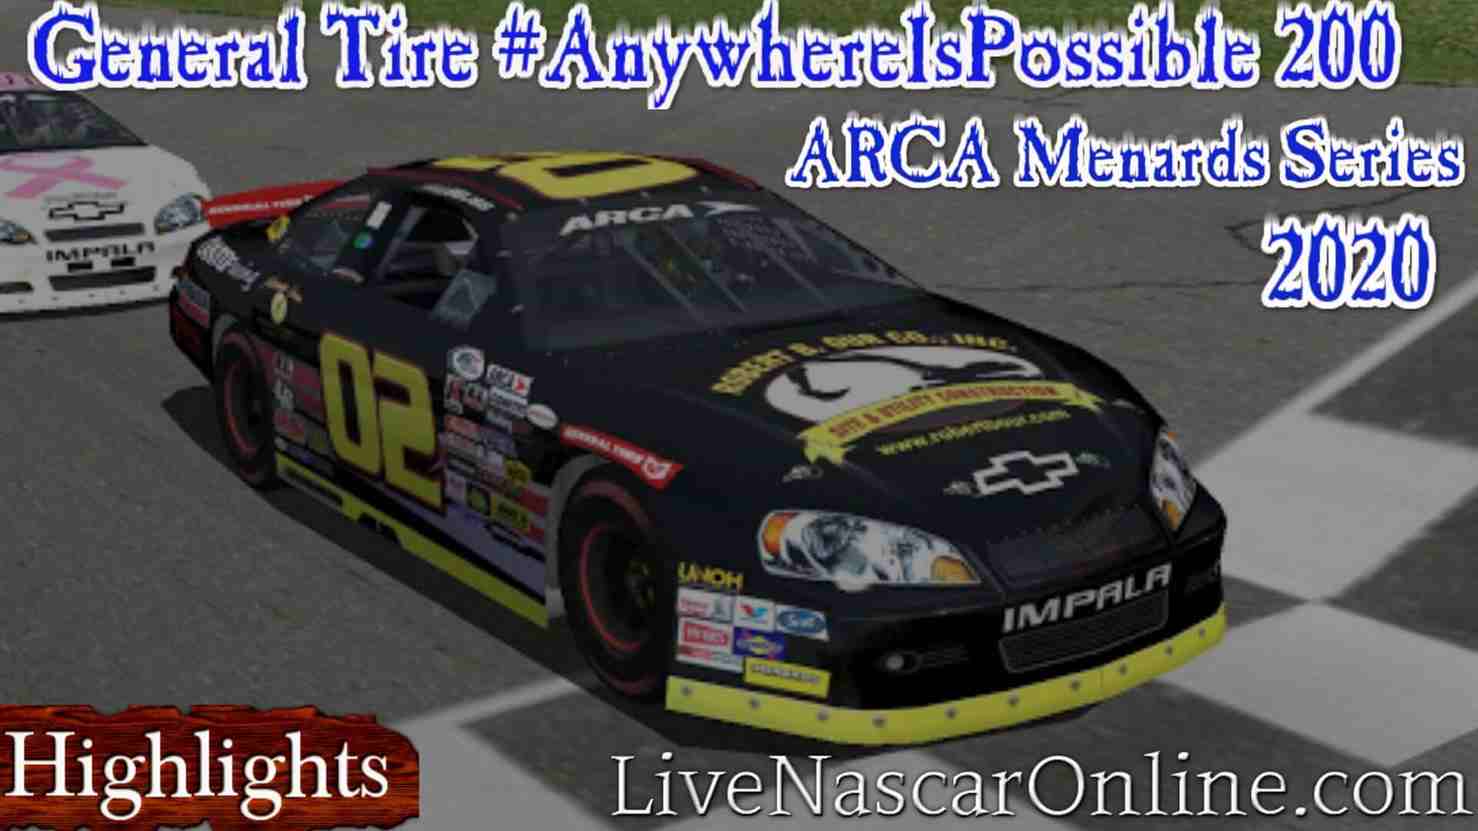 General Tire AnywhereIsPossible 200 Arca 2020 Highlights